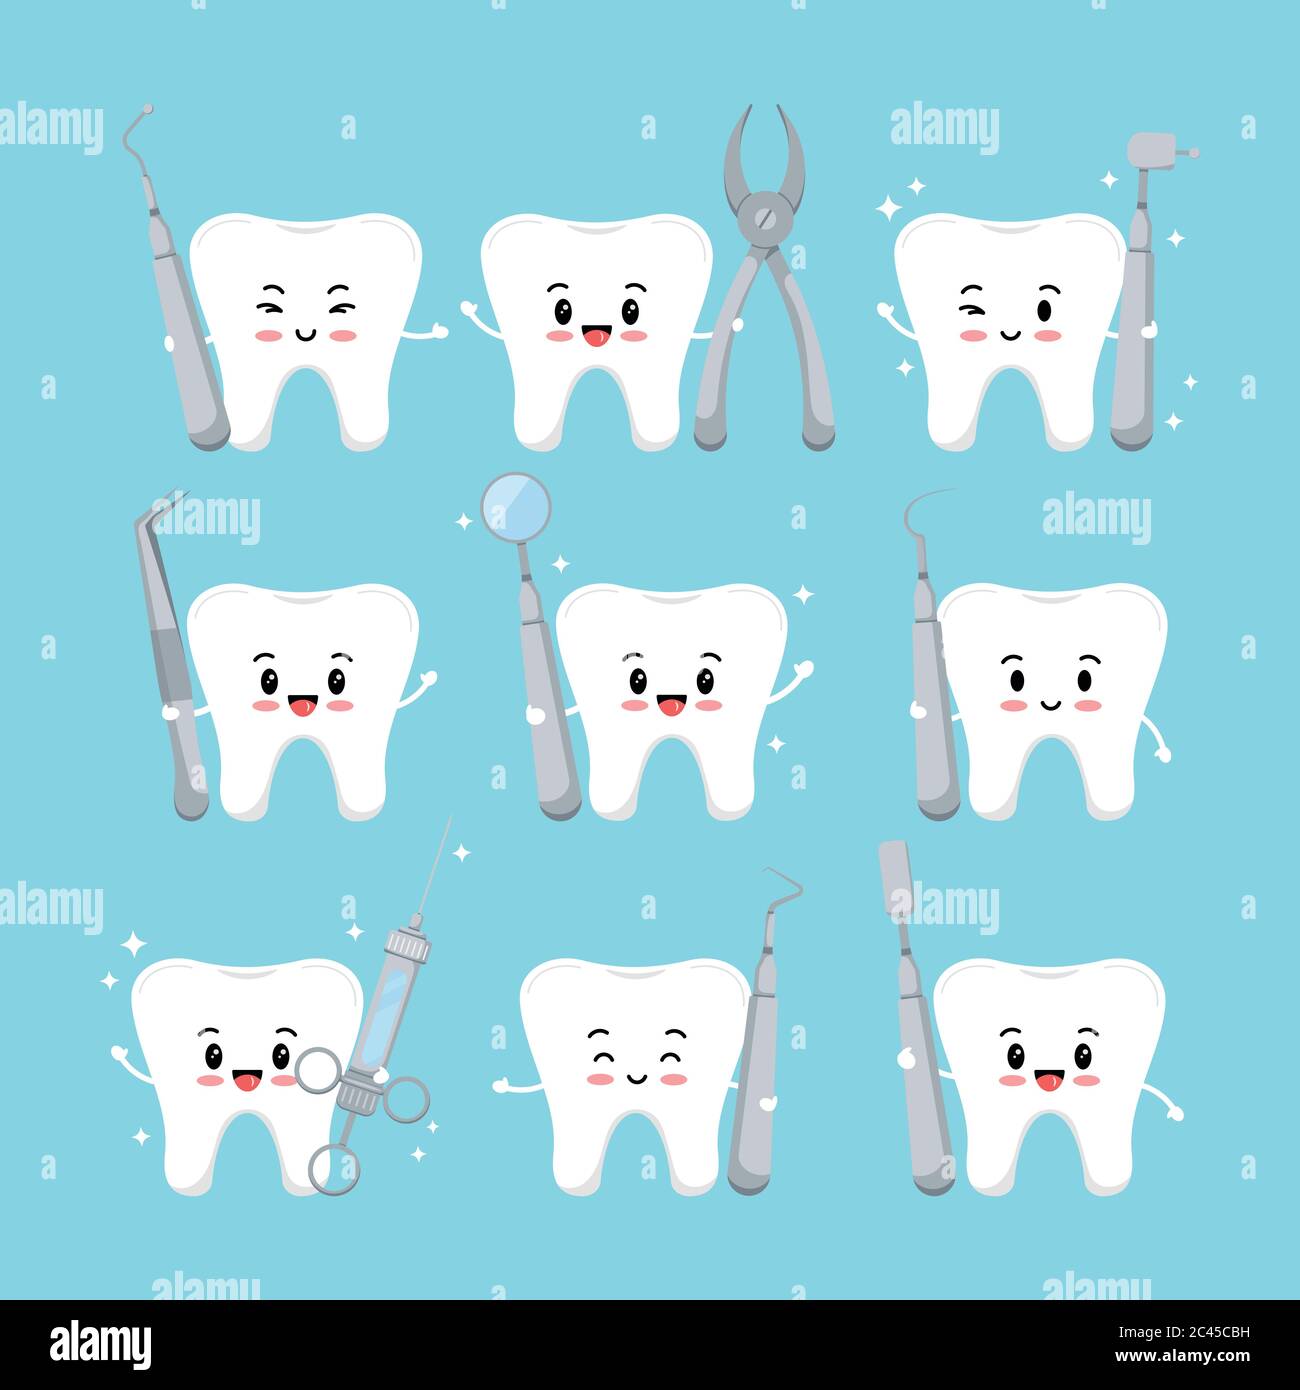 Cute tooth with dental tools icons set isolated on blue background. Stock Vector